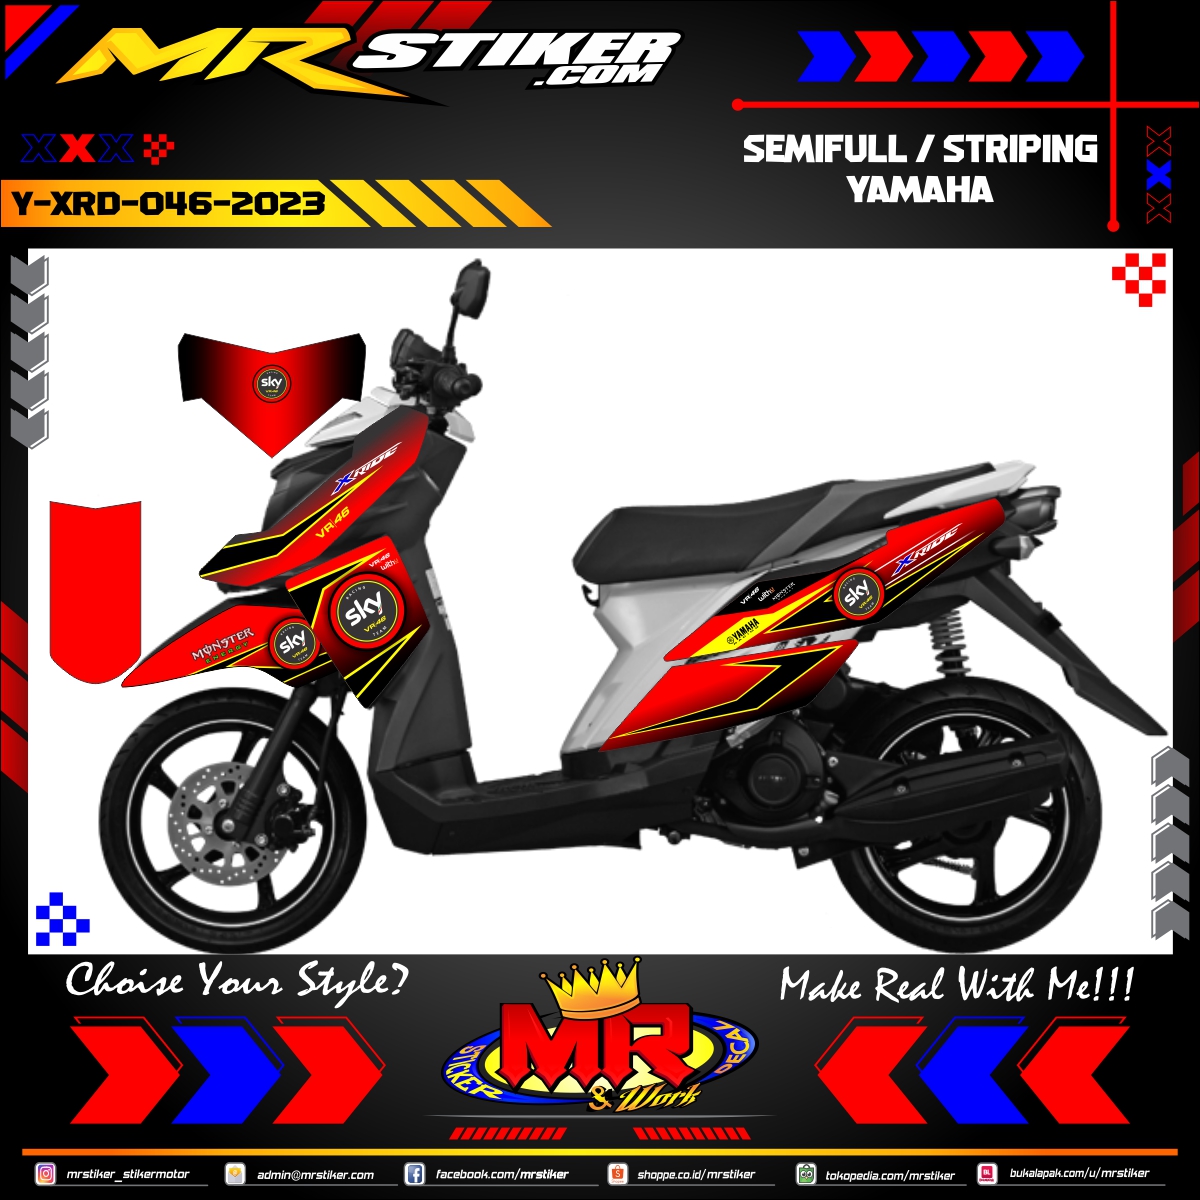 Stiker motor decal Yamaha X-RIDE Red SKY Edition VR 46 Wrapping